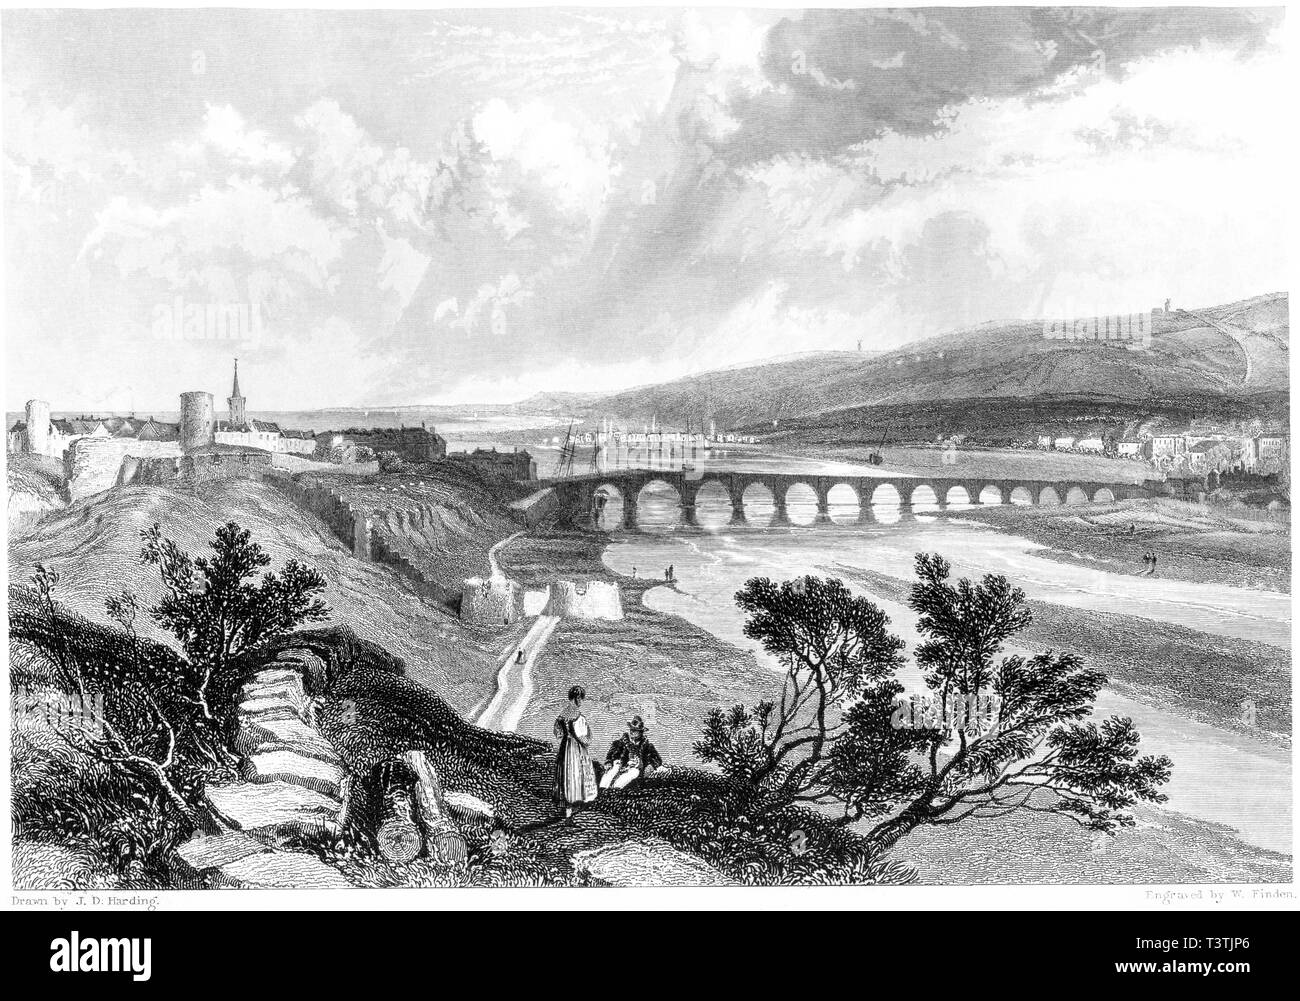 An engraving of Berwick with the Bridge from the NW scanned at high resolution from a book published in 1842. Believed copyright free. Stock Photo